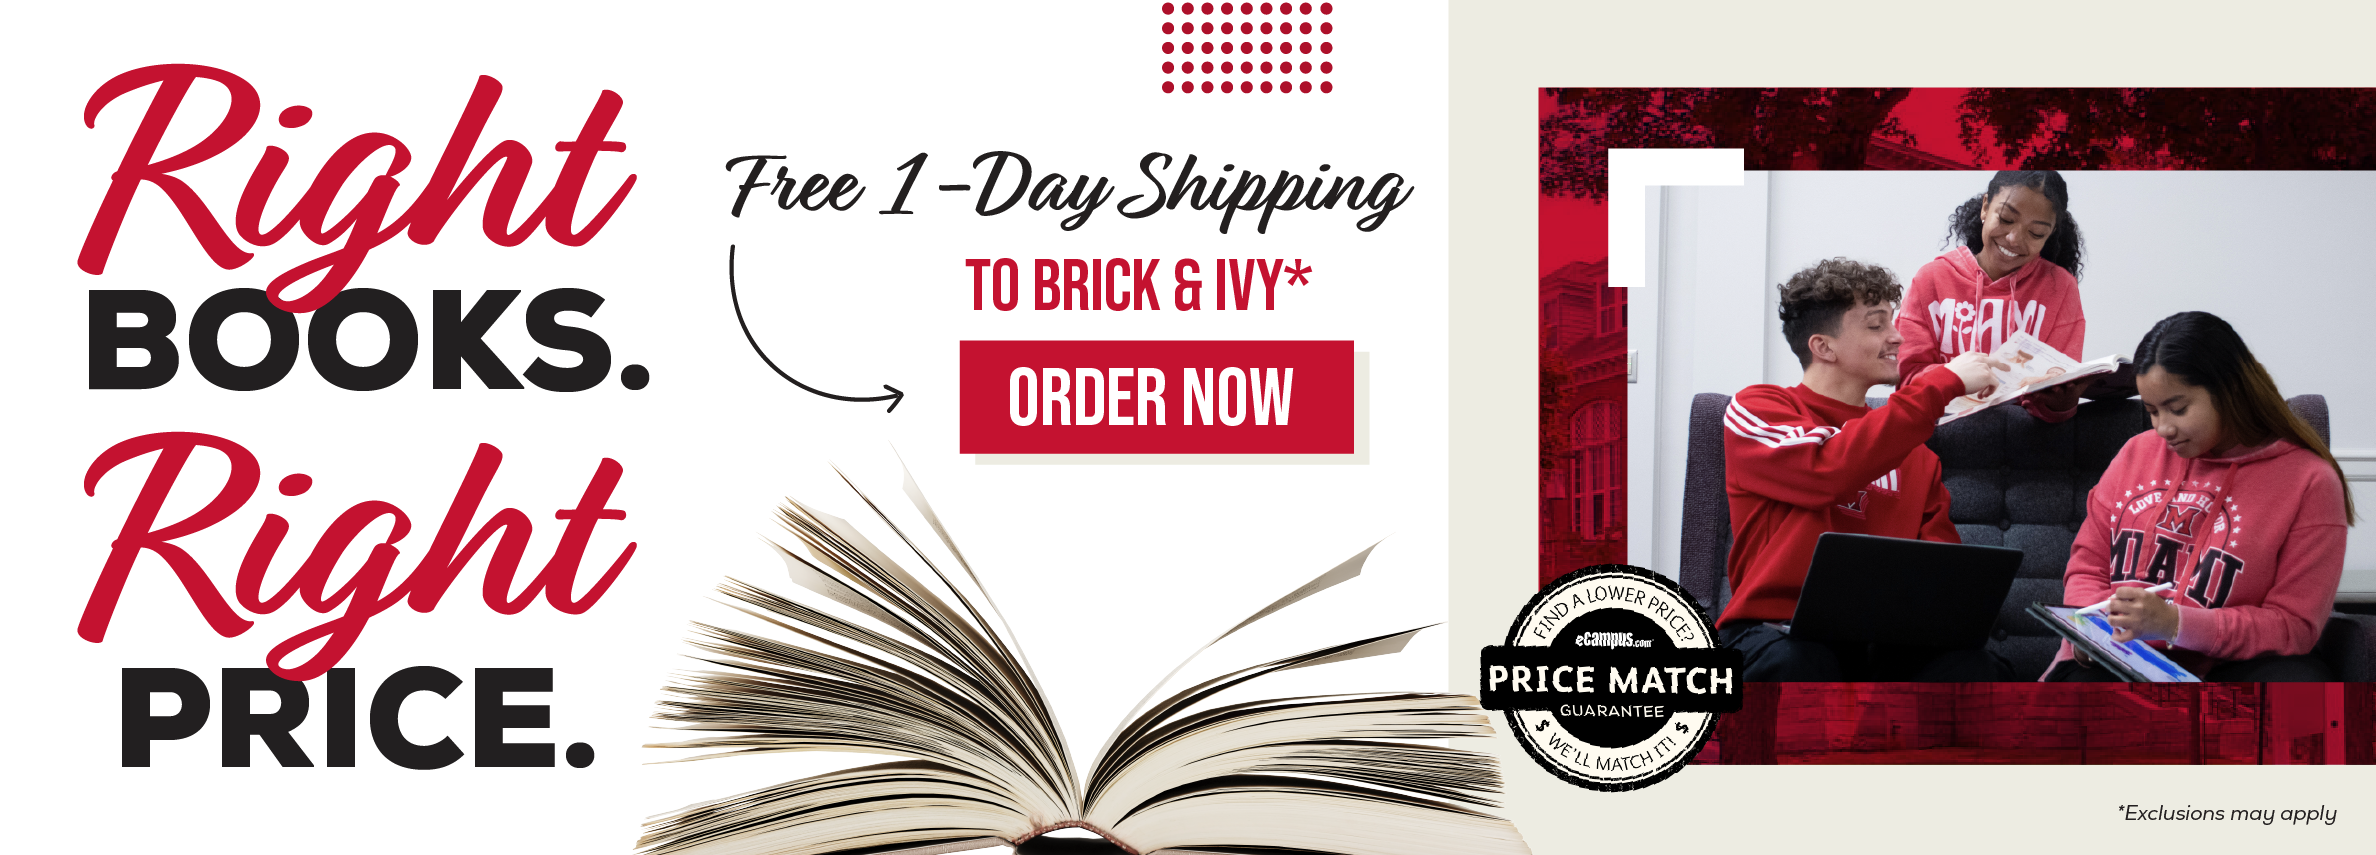 Right books. Right price. Free 1-day shipping to Brick & Ivy* Order now. Price Match Guarantee. *Exclusions may apply.